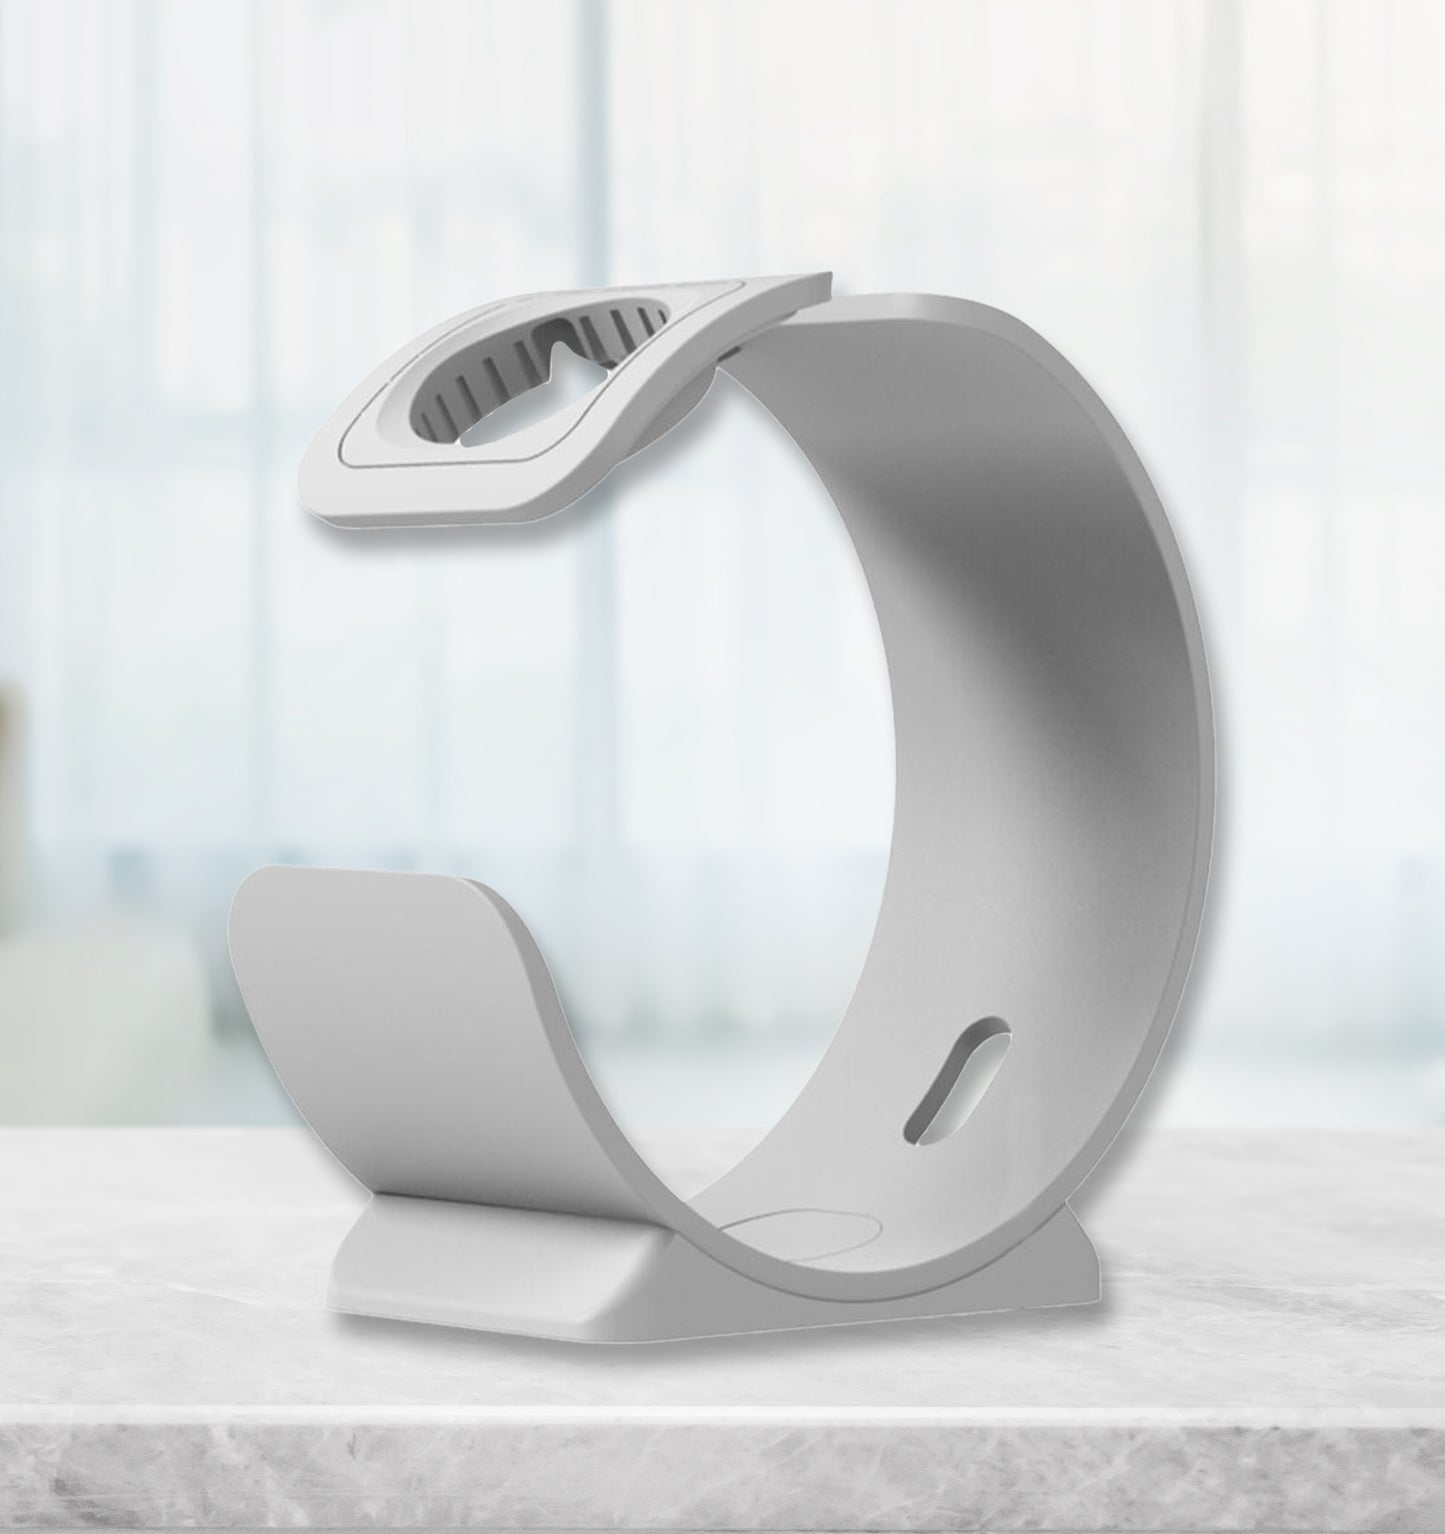 Mini Charger Stand for iWatch | Apple Watch Charging Dock Station